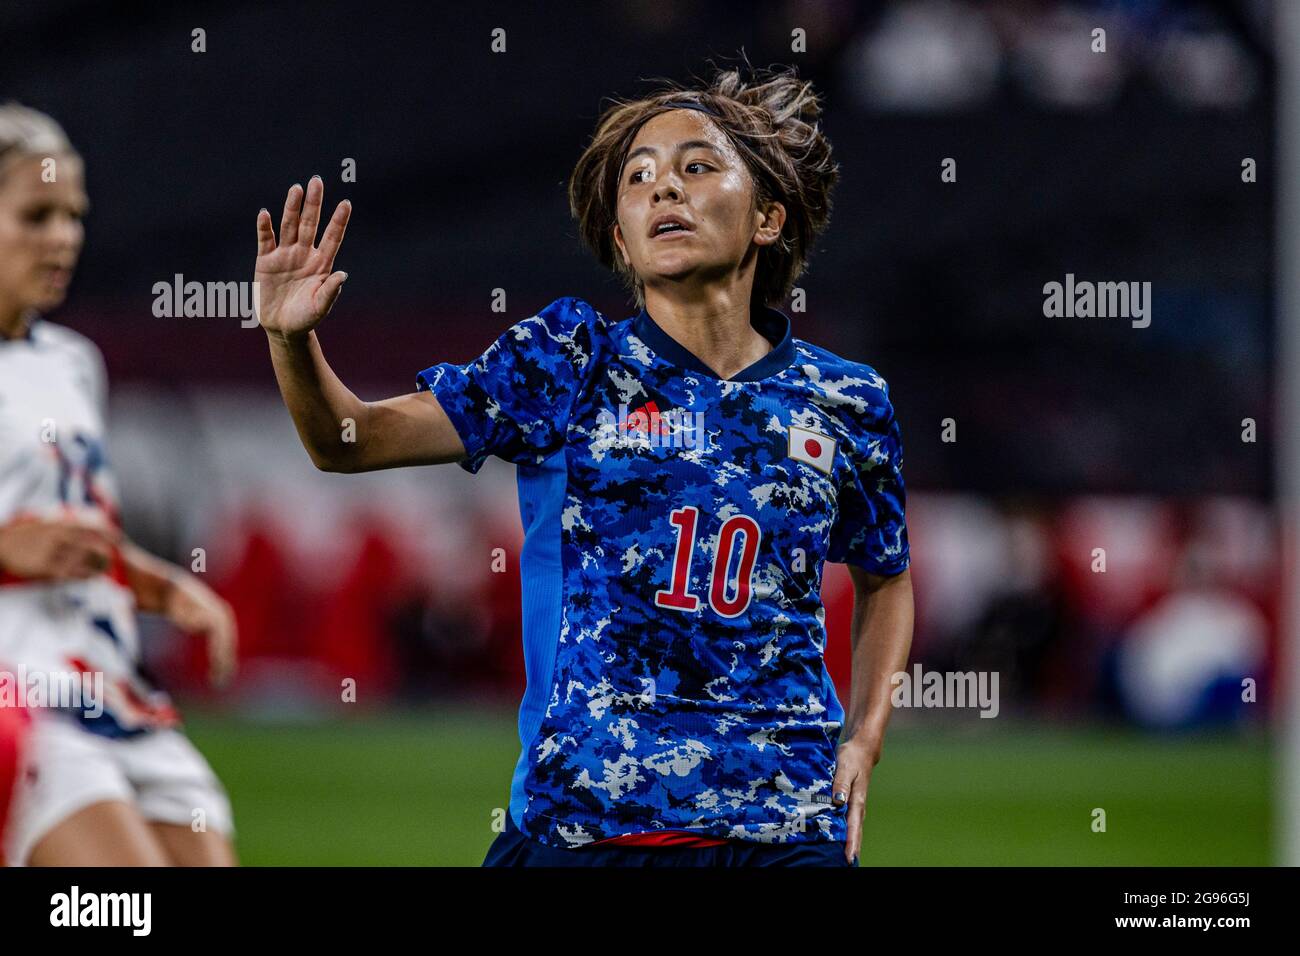 Hokkaido, Japan. 24th July, 2021. Mana Iwabuchi (JPN) Football/Soccer : Women's First Round Group E match between Japan - Great Britain during the Tokyo 2020 Olympic Games at the Sapporo Dome in Hokkaido, Japan . Credit: Takeshi Nishimoto/AFLO/Alamy Live News Stock Photo